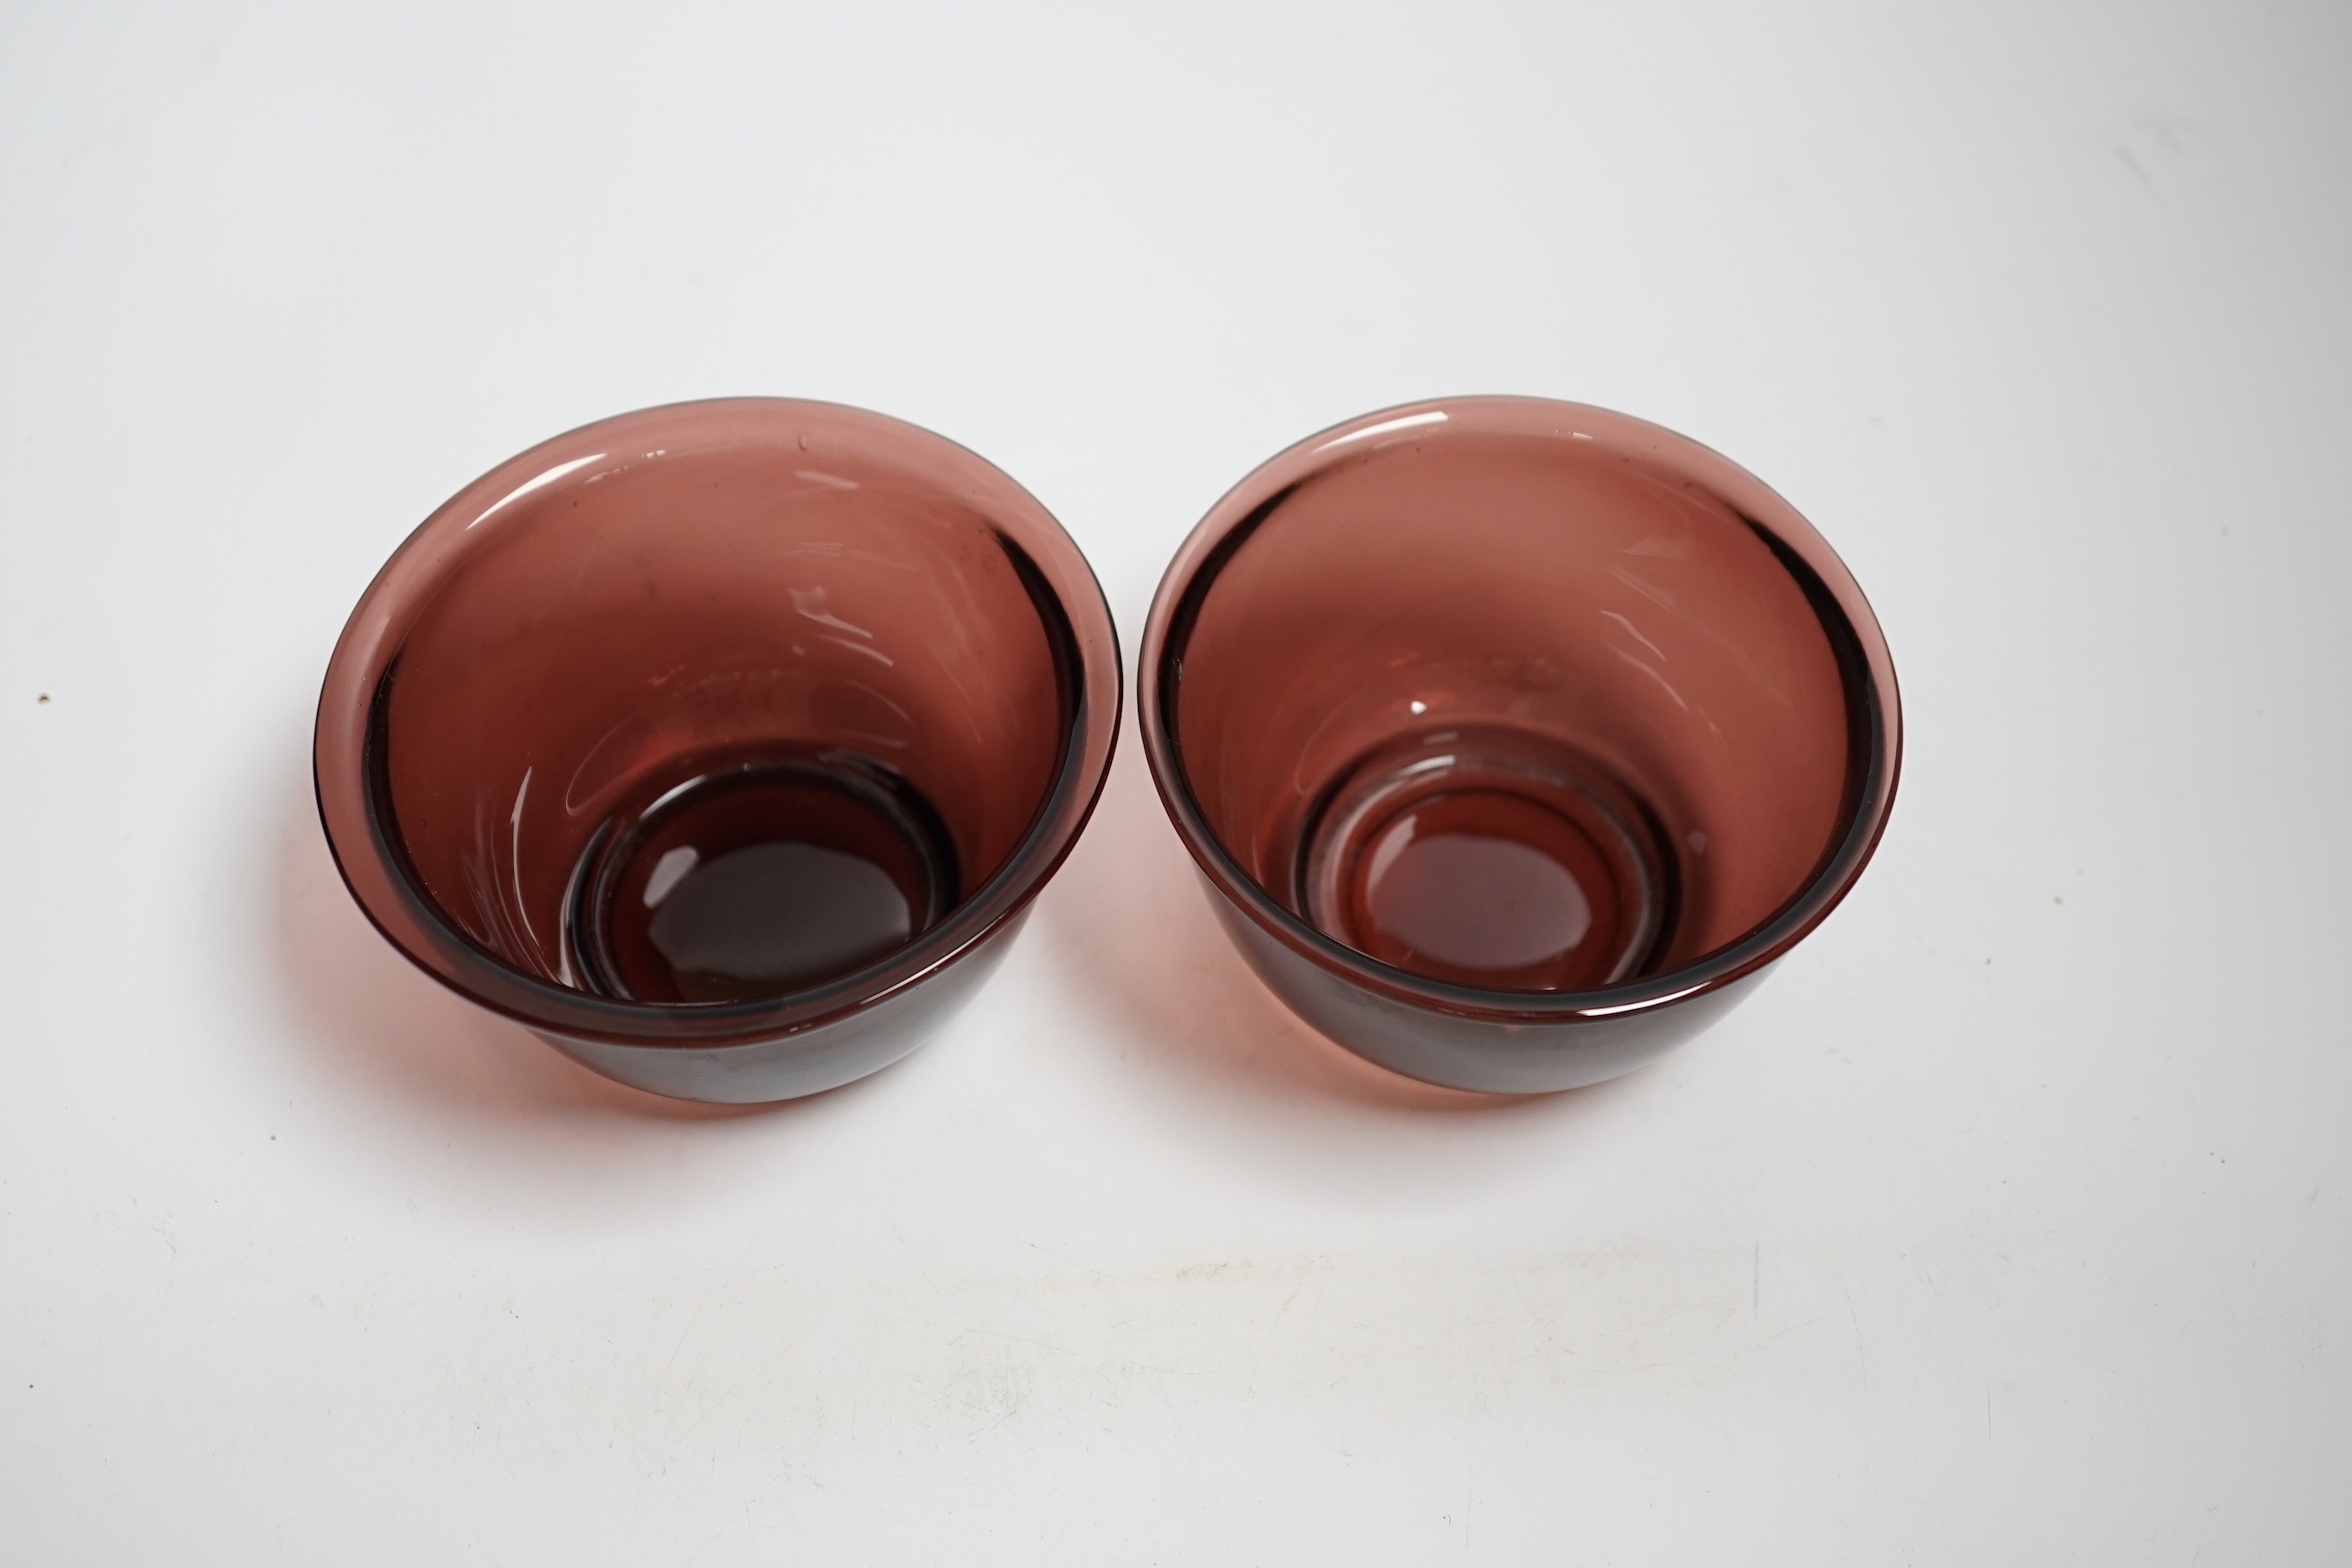 A pair of Chinese Peking glass bowls (amethyst), 10cm